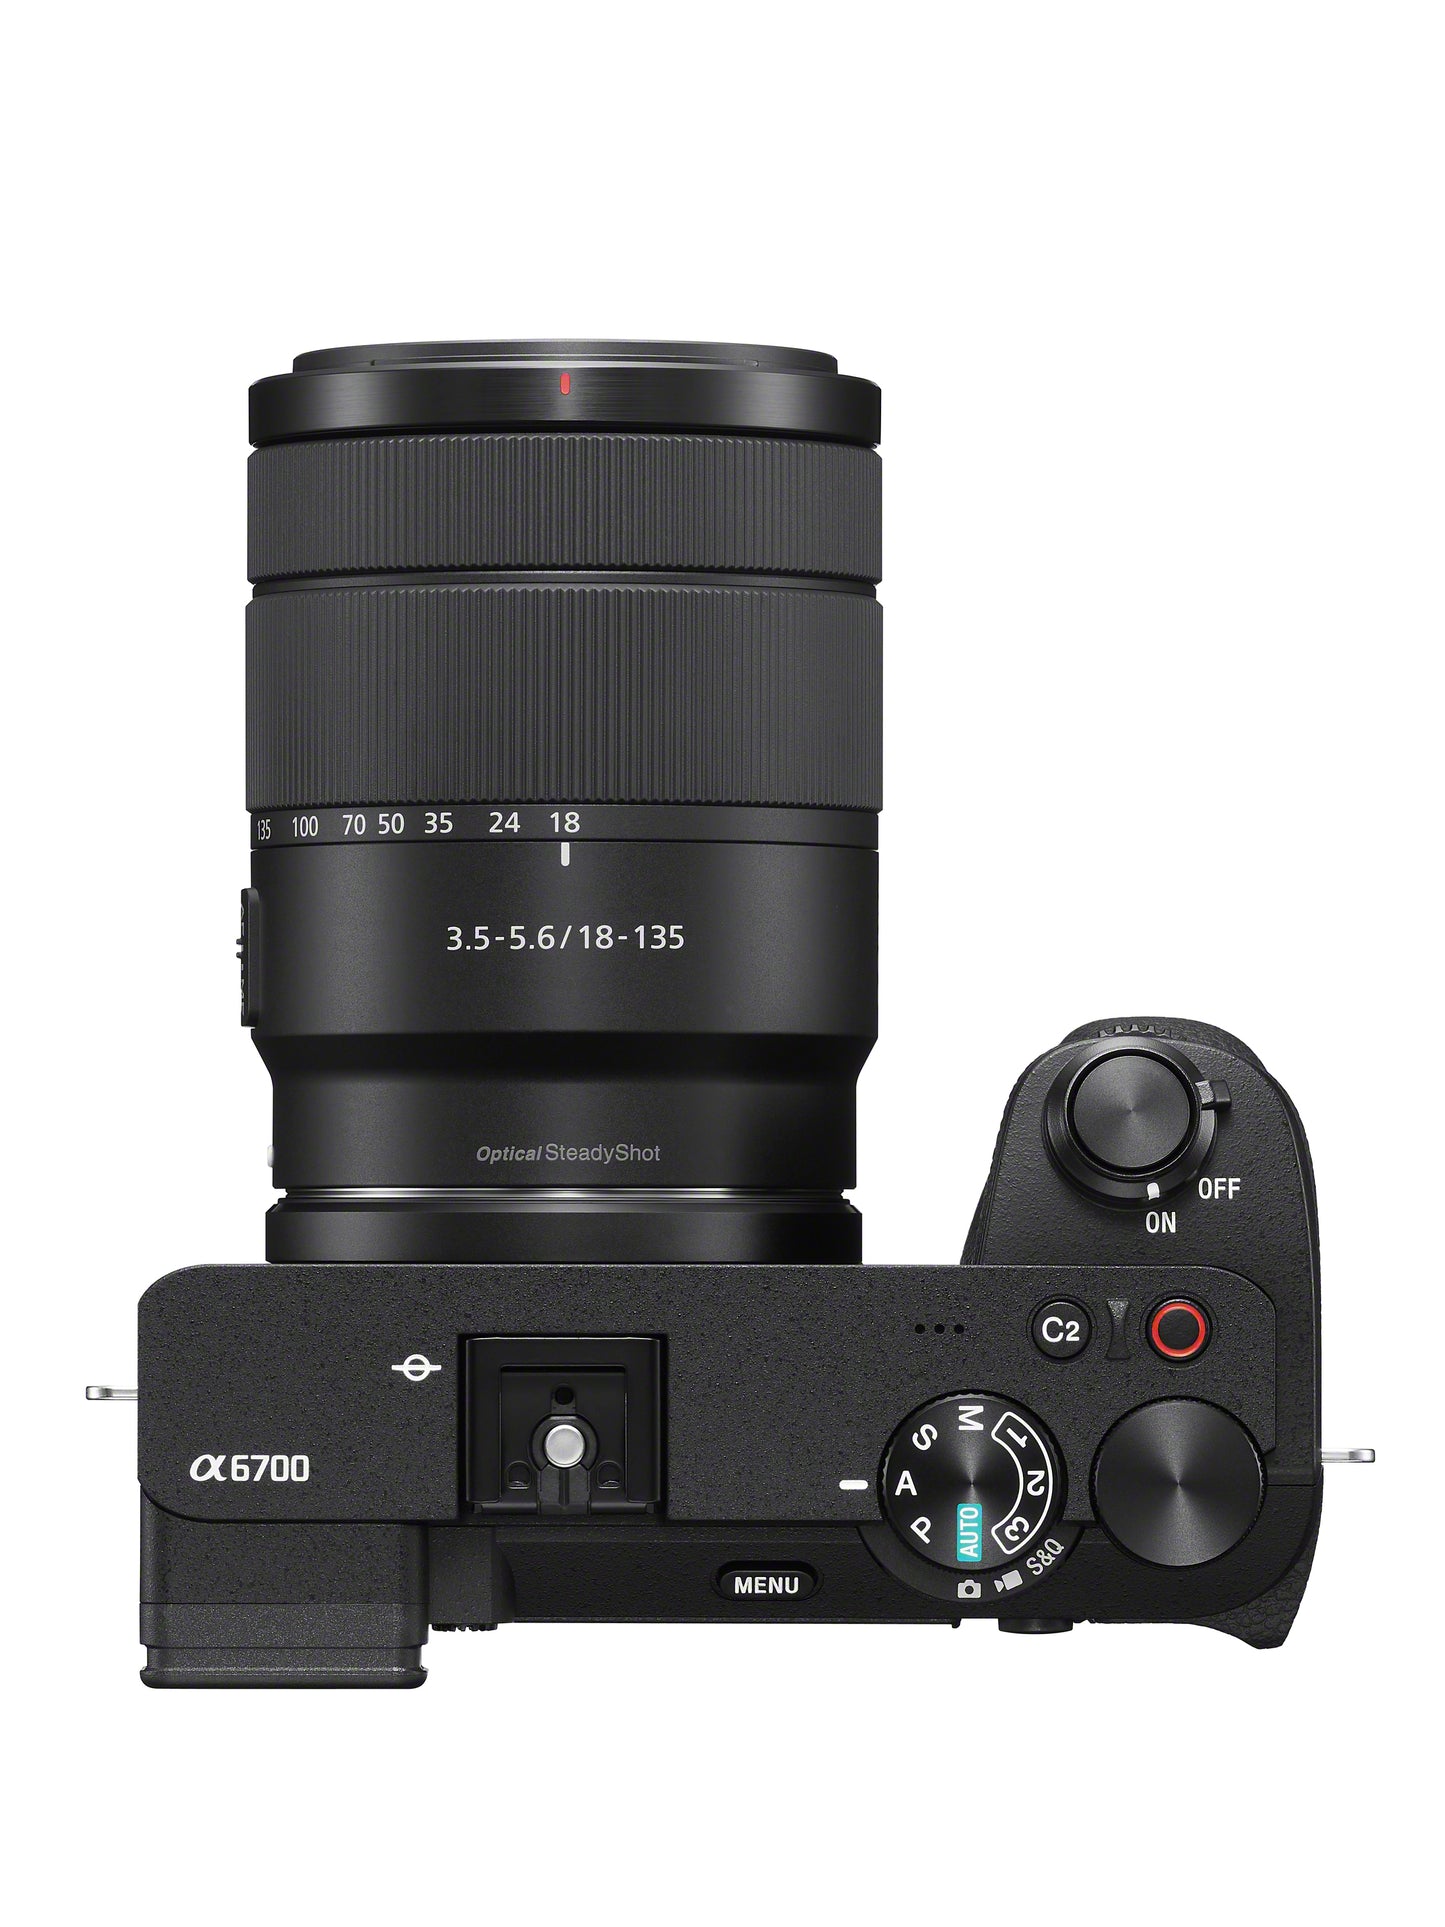 Sony a6700 Mirrorless APS-C Camera with 18-135mm Lens